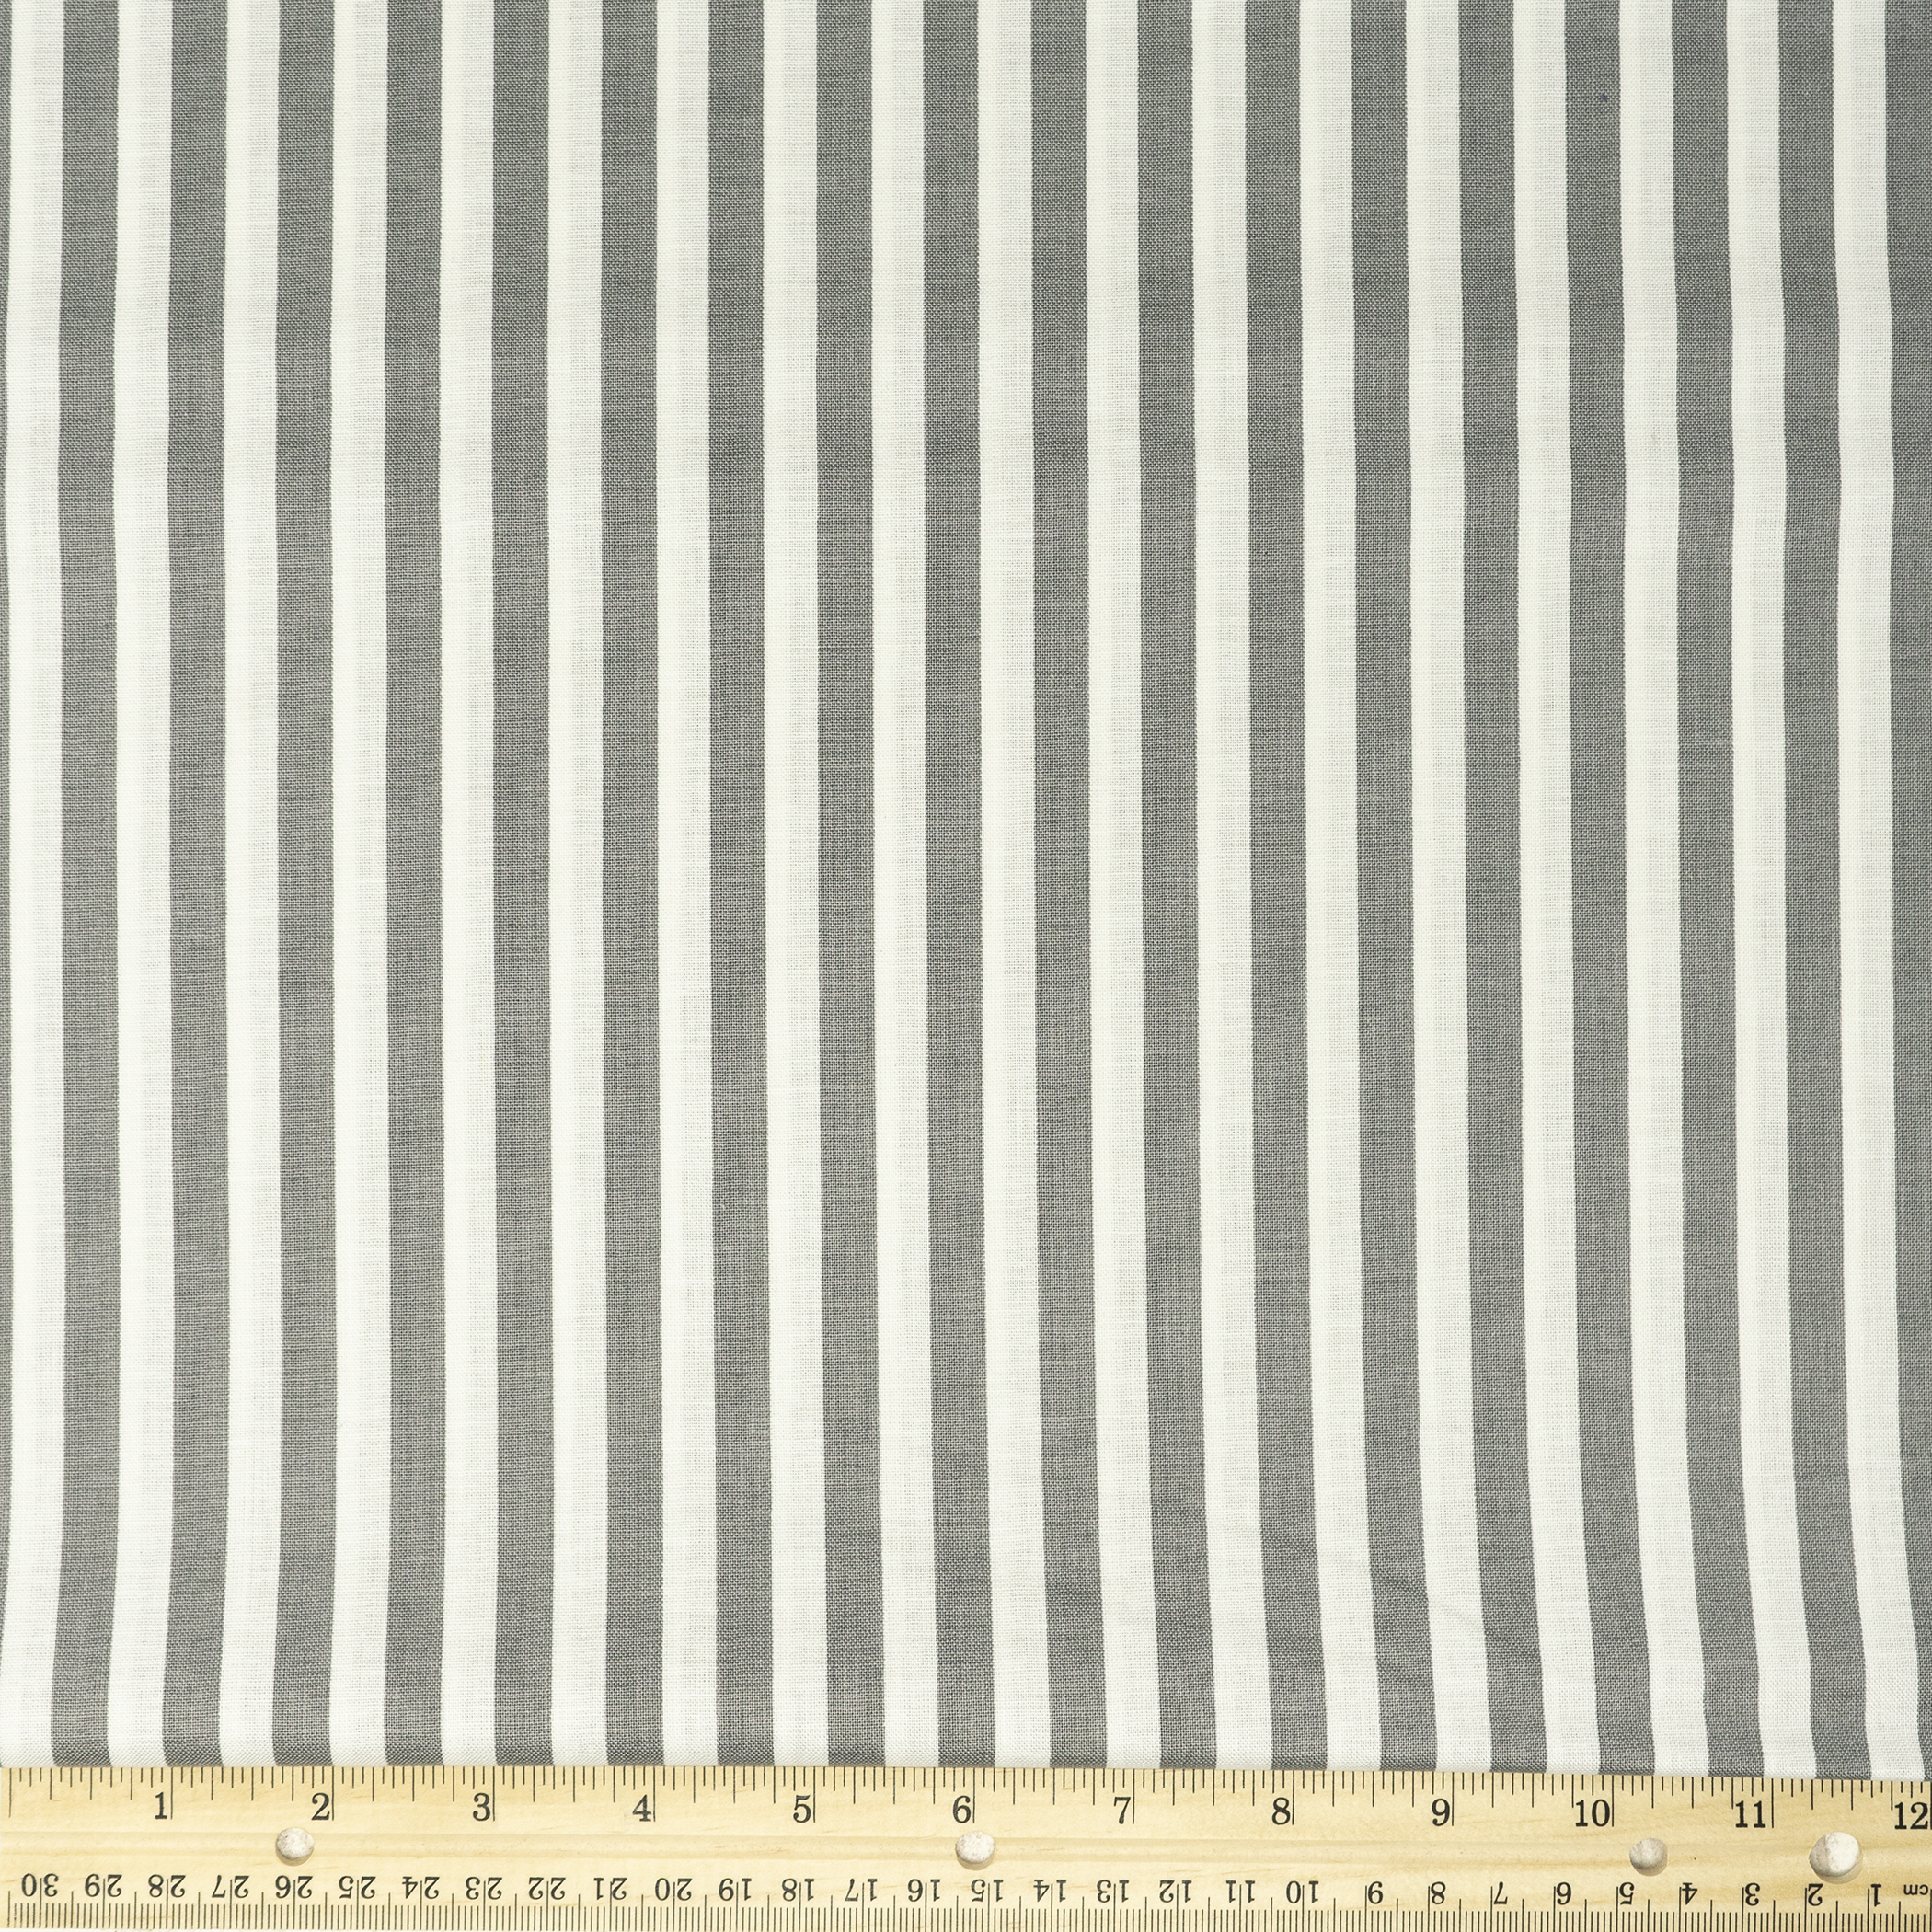 Waverly Inspirations Cotton 44 inch Stripes Steel Color Sewing Fabric by The Yard, Size: 36 inch x 44 inch